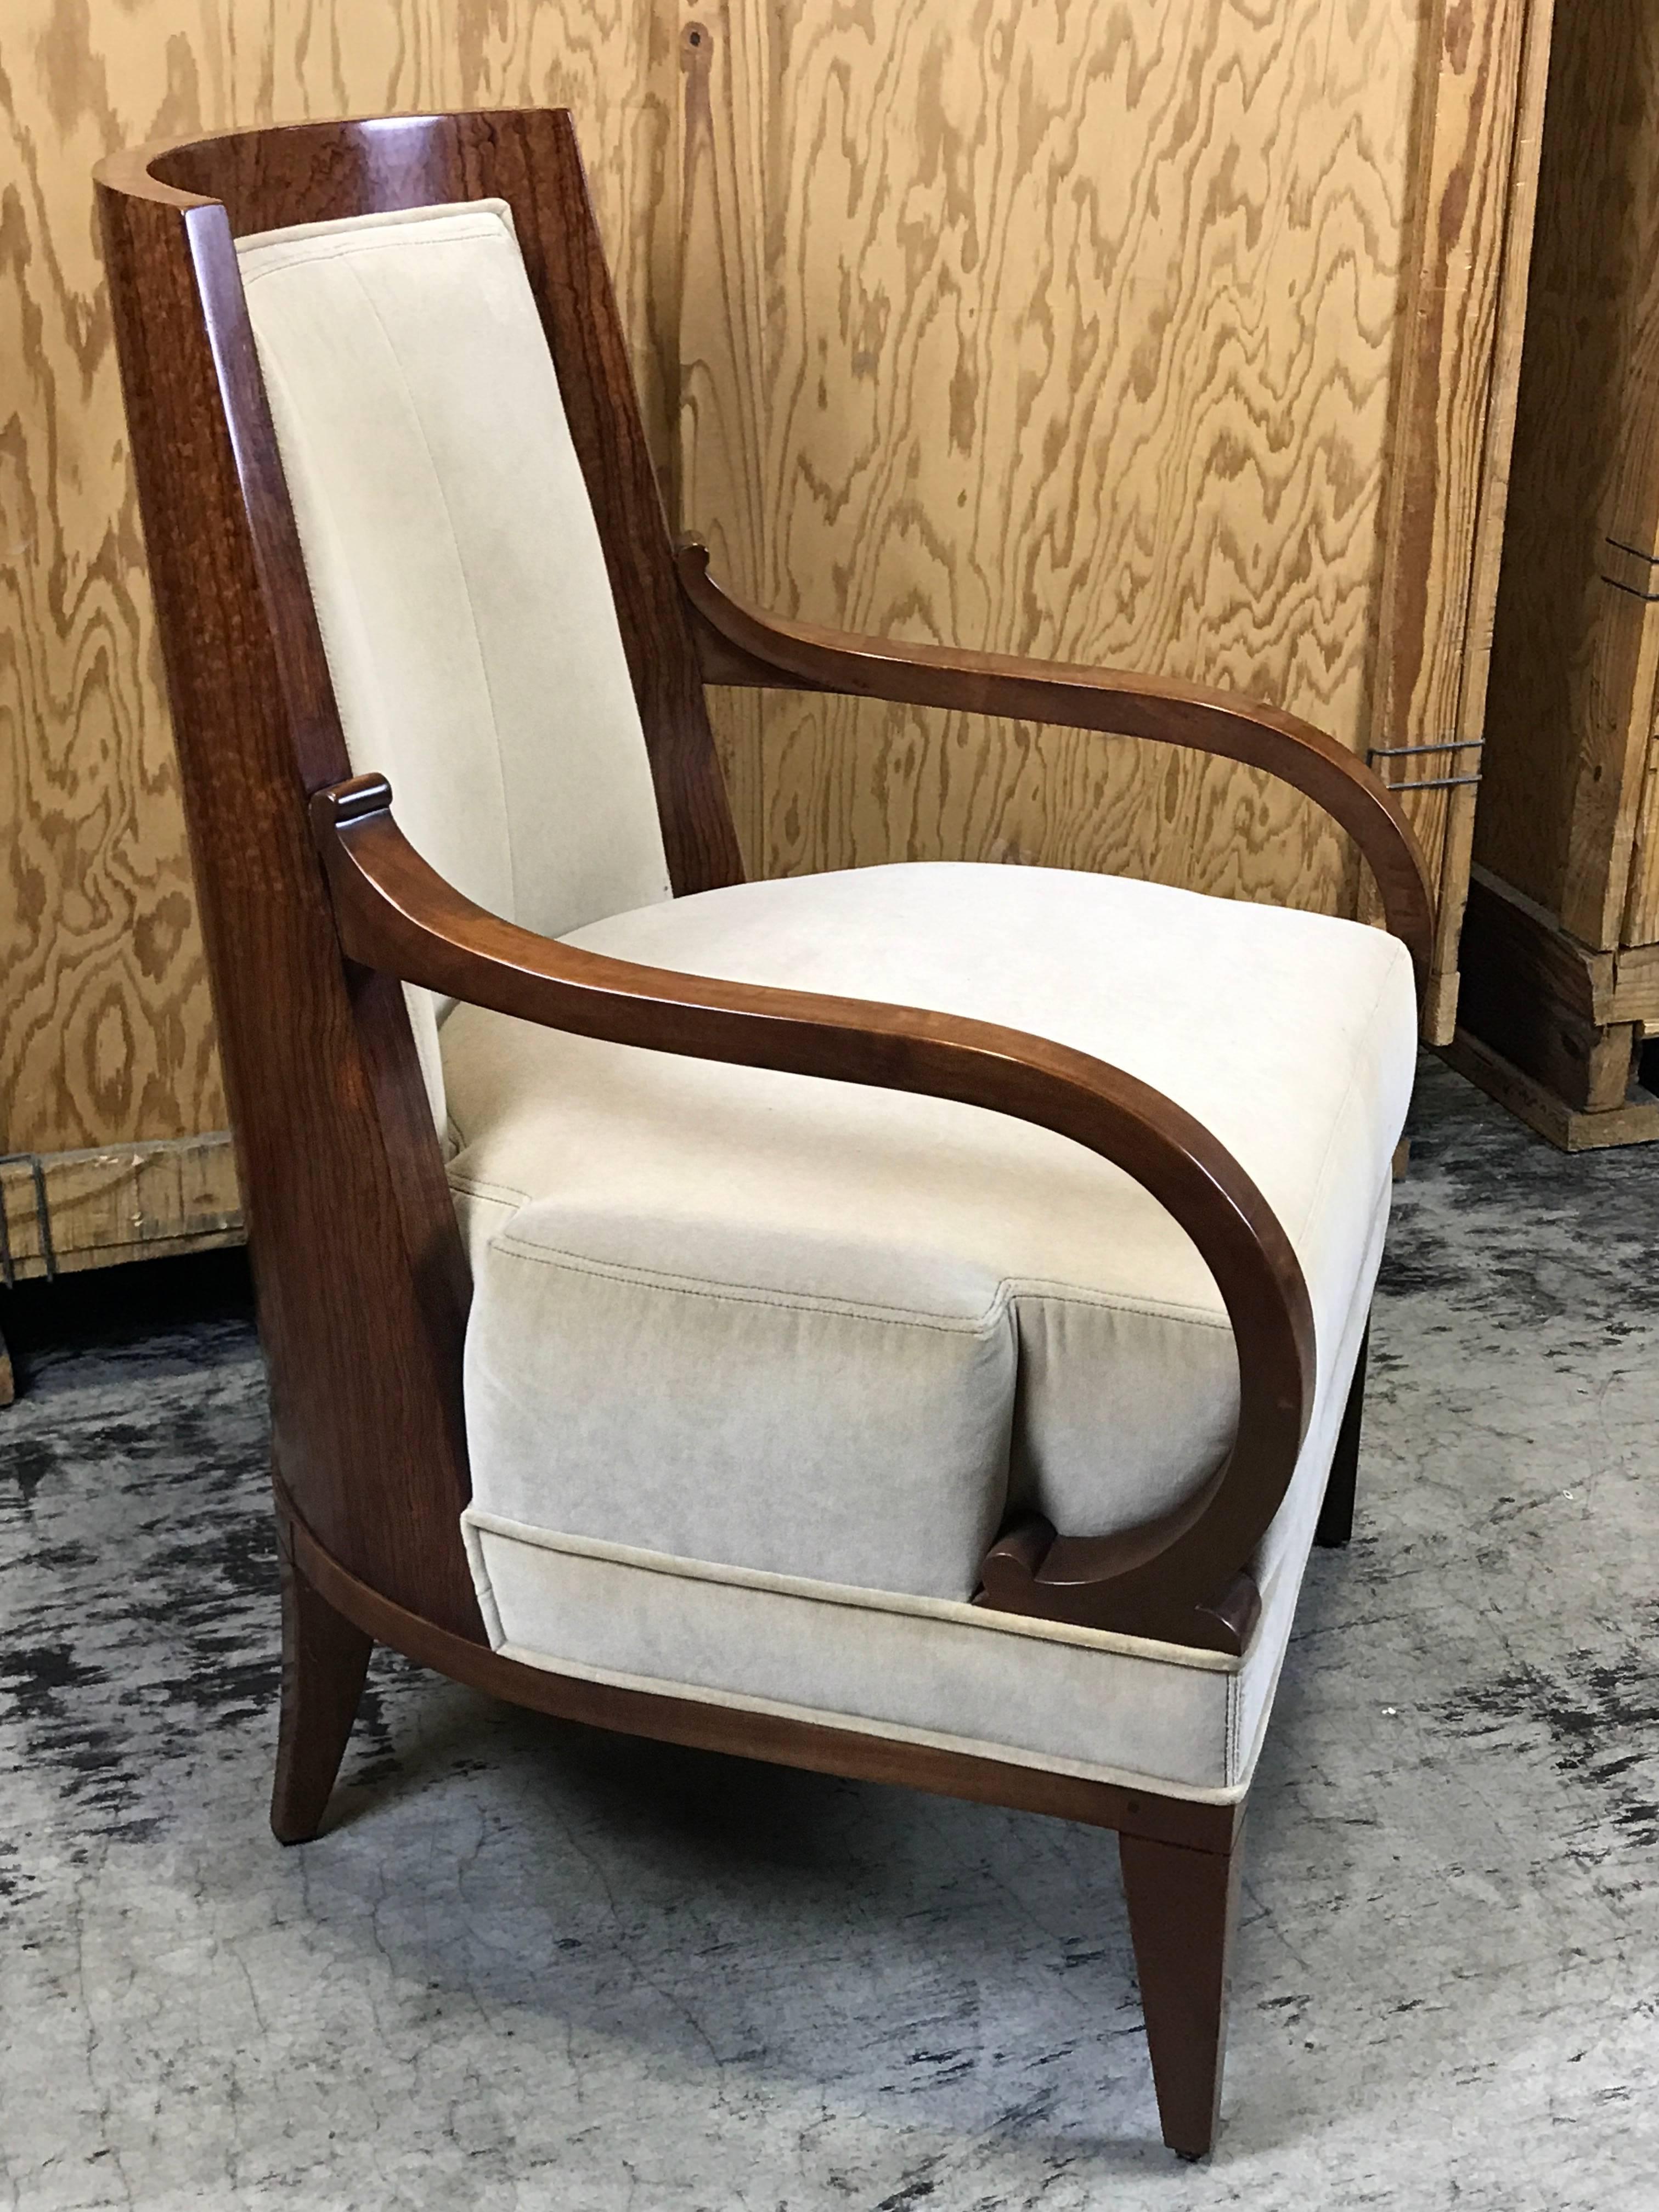 Andre Arbus edition barrel back club chair, by William Switzer, Licensed Re- Edition of a masterwork, handmade in 2006. The chair is stamped and in excellent condition.